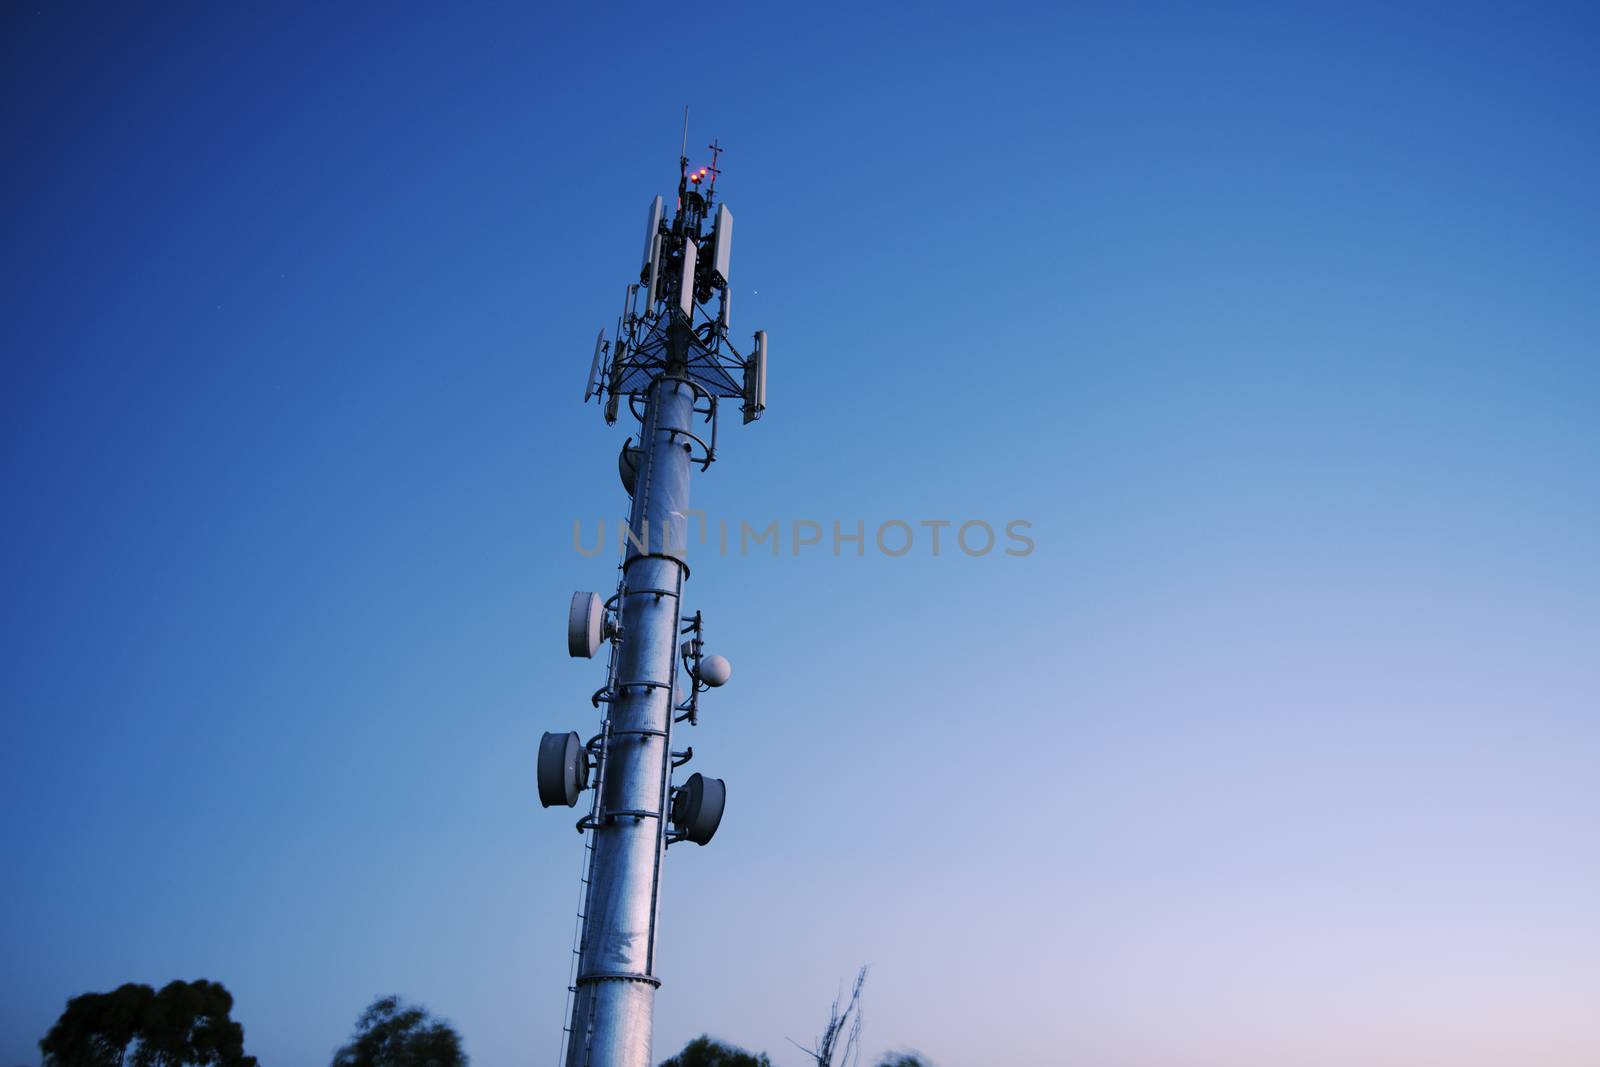 Large radio and communications tower in Ipswich City, Queensland by artistrobd